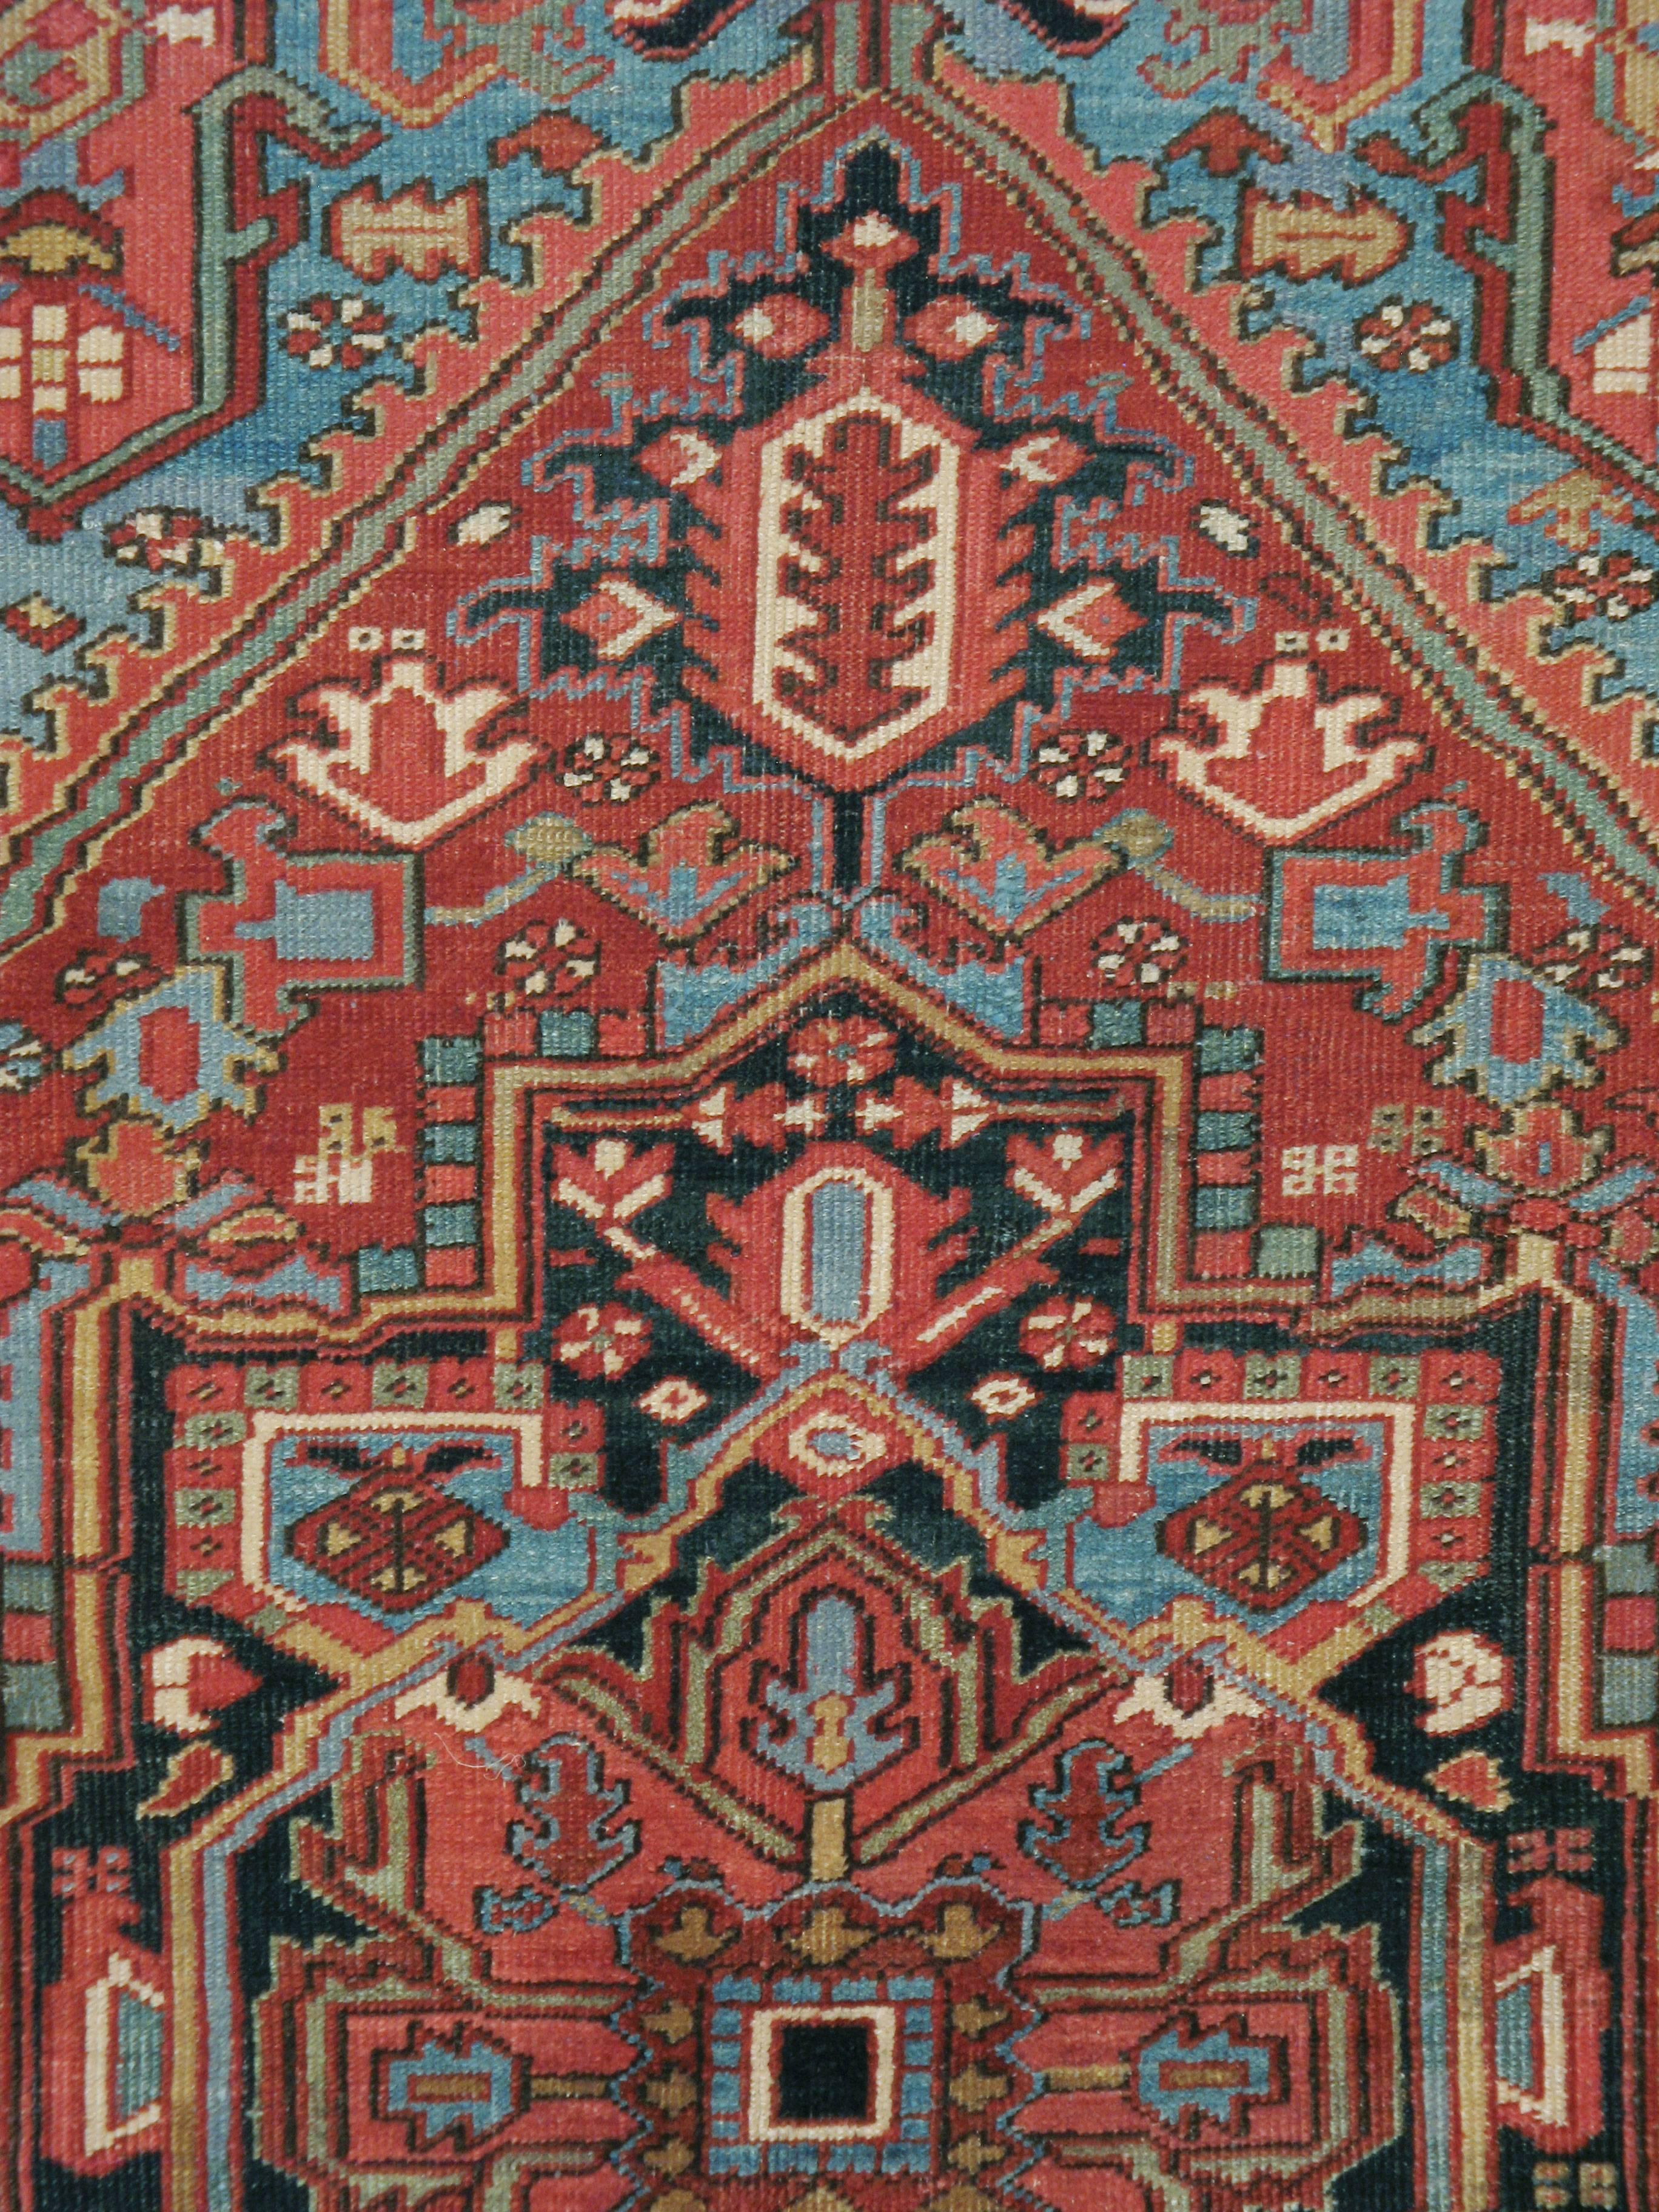 An antique Persian Heriz rug from the early 20th century.